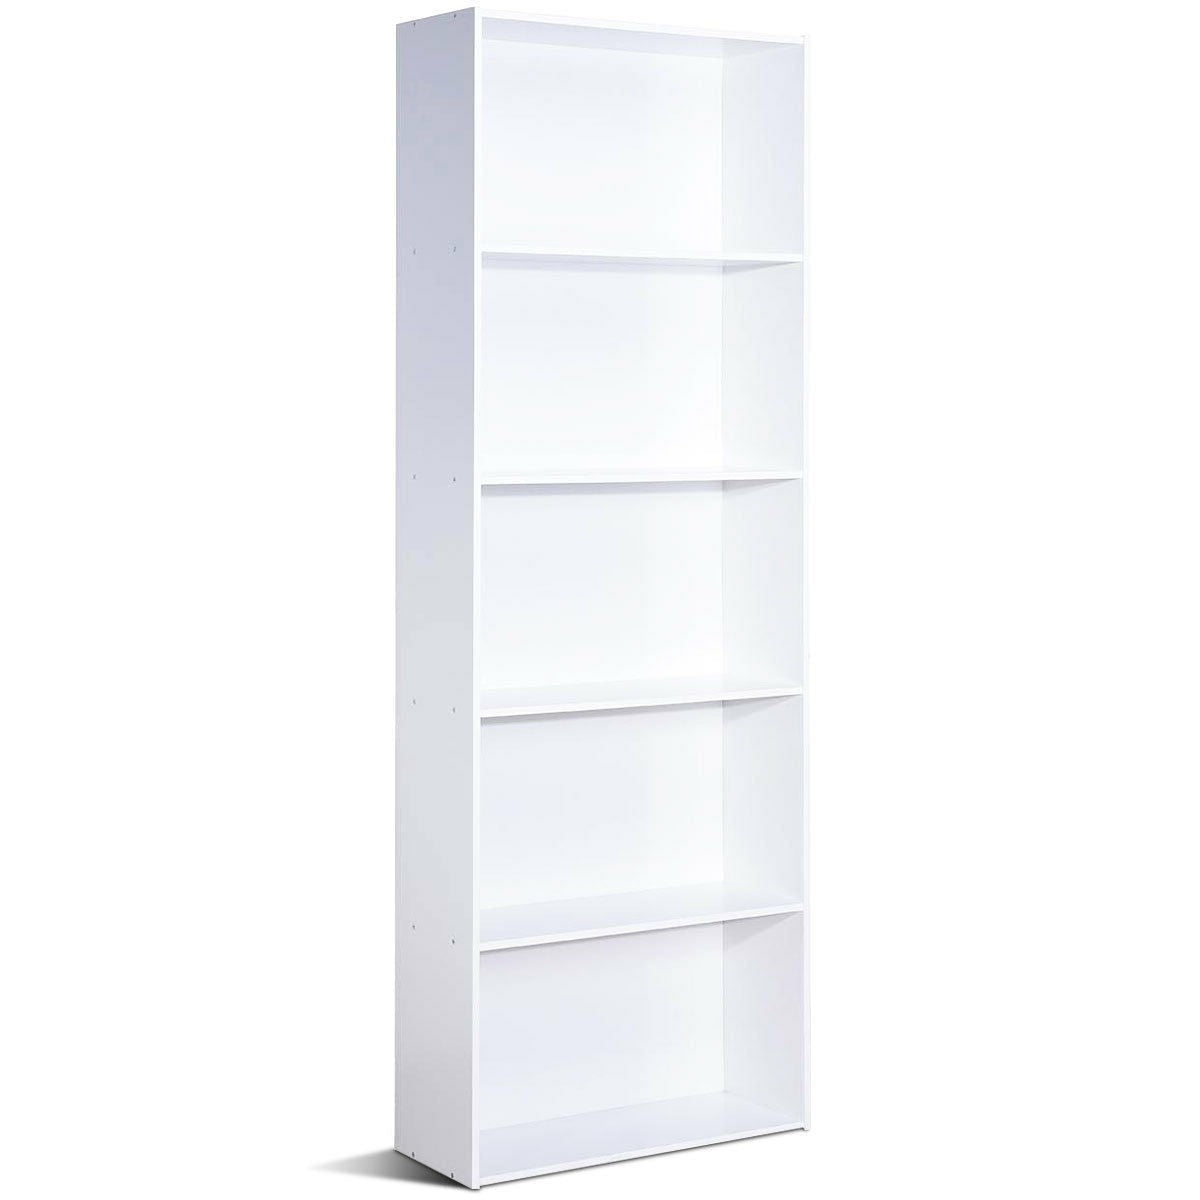 Living Room > Bookcases - Modern 5-Tier Bookcase Storage Shelf In White Wood Finish